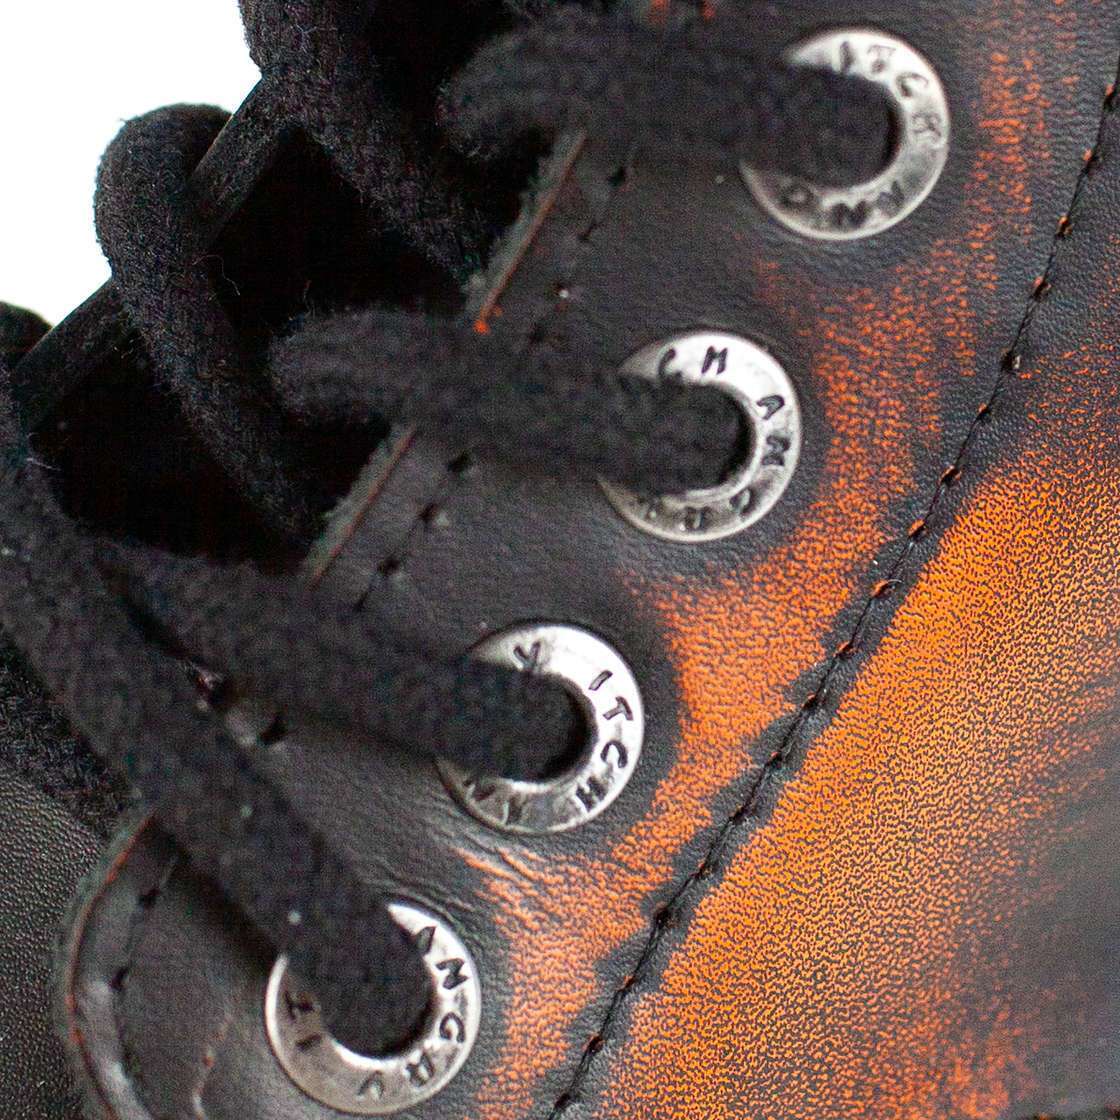 Angry Itch 8 Hole Black Leather Orange Rub Off Combat Ranger Boots Steel Toe